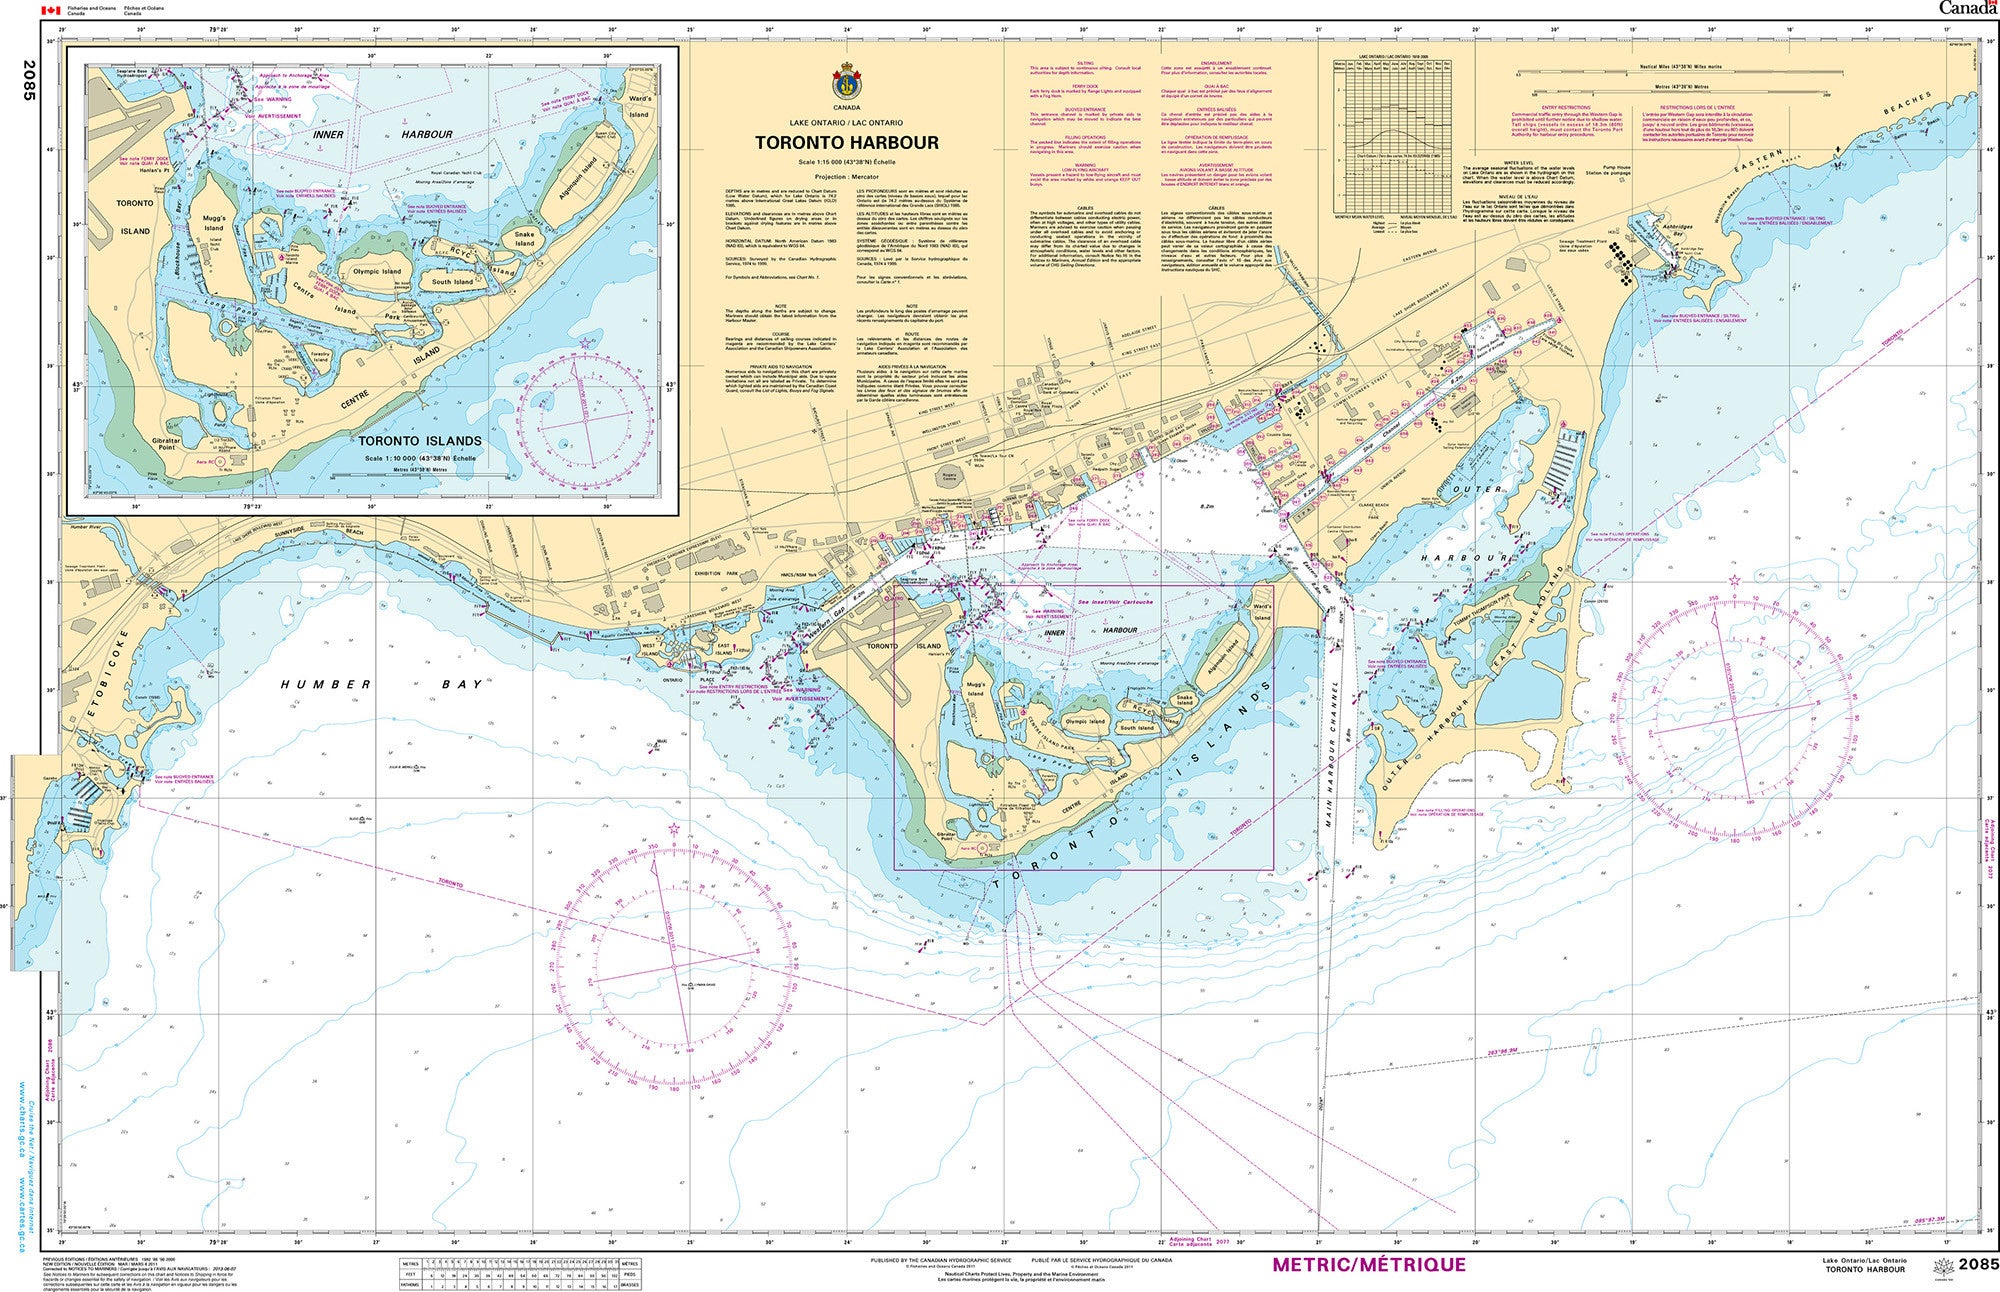 Canadian Hydrographic Service Nautical Chart CHS2085: Toronto Harbour